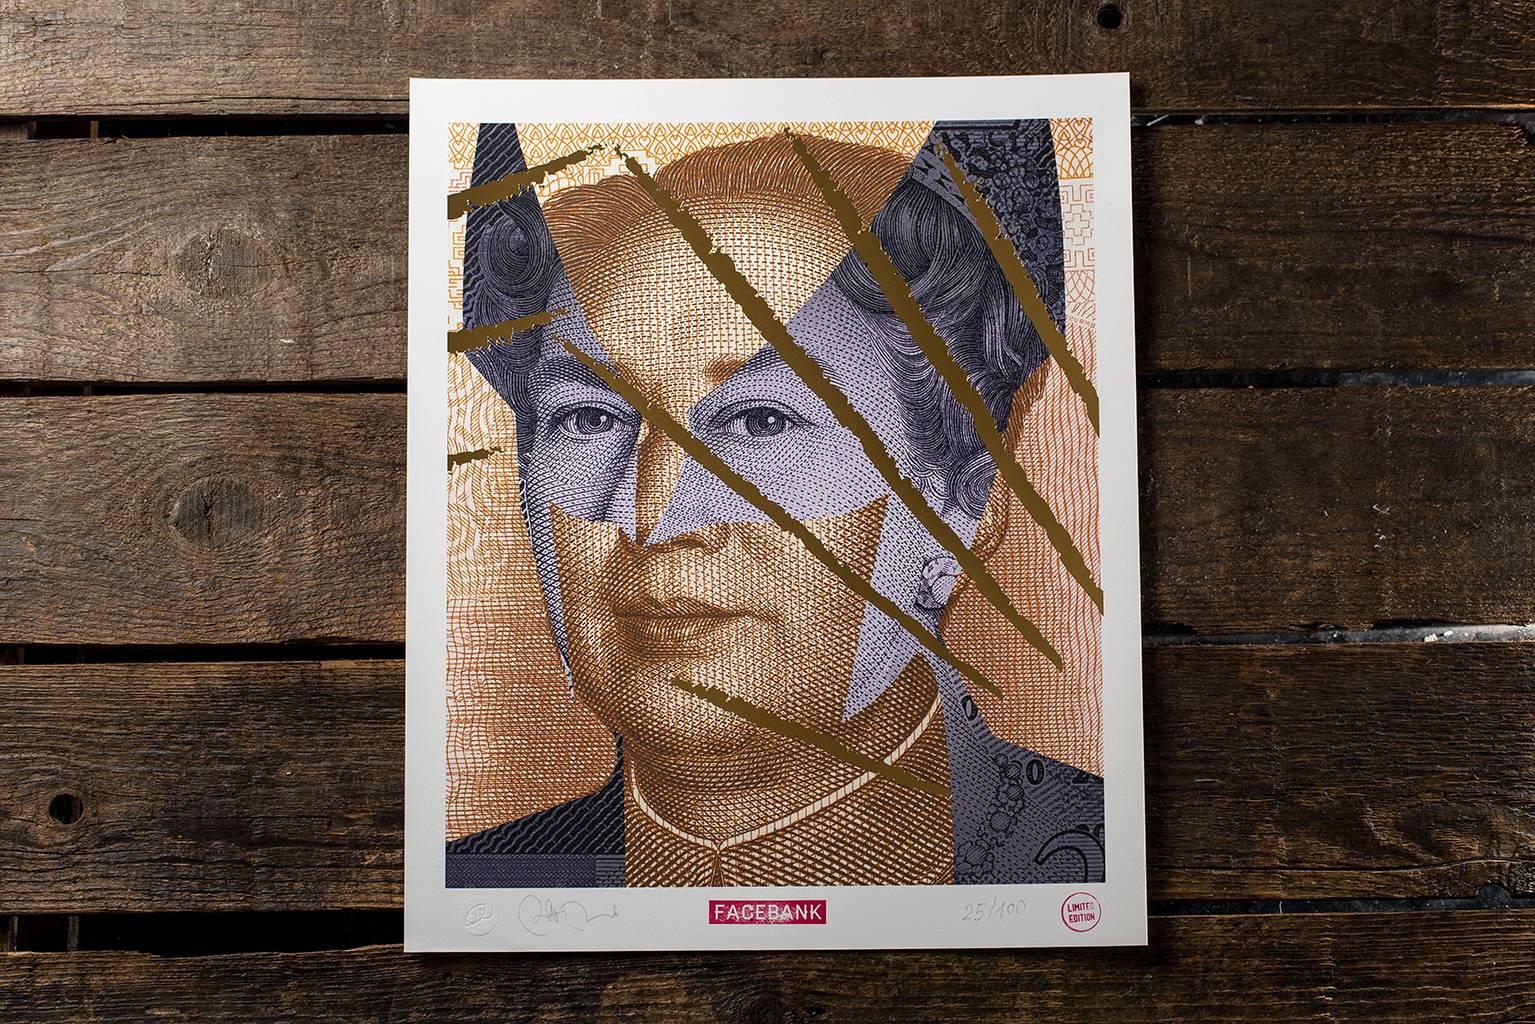 Alessandro Rabatti- Wolvbank

Technique: Digigraphy on Hahnemuhle paper and printed hot molded gold leaves.

Dimensions: 45.5 cm x 38.5 cm

Limited Edition of 100 